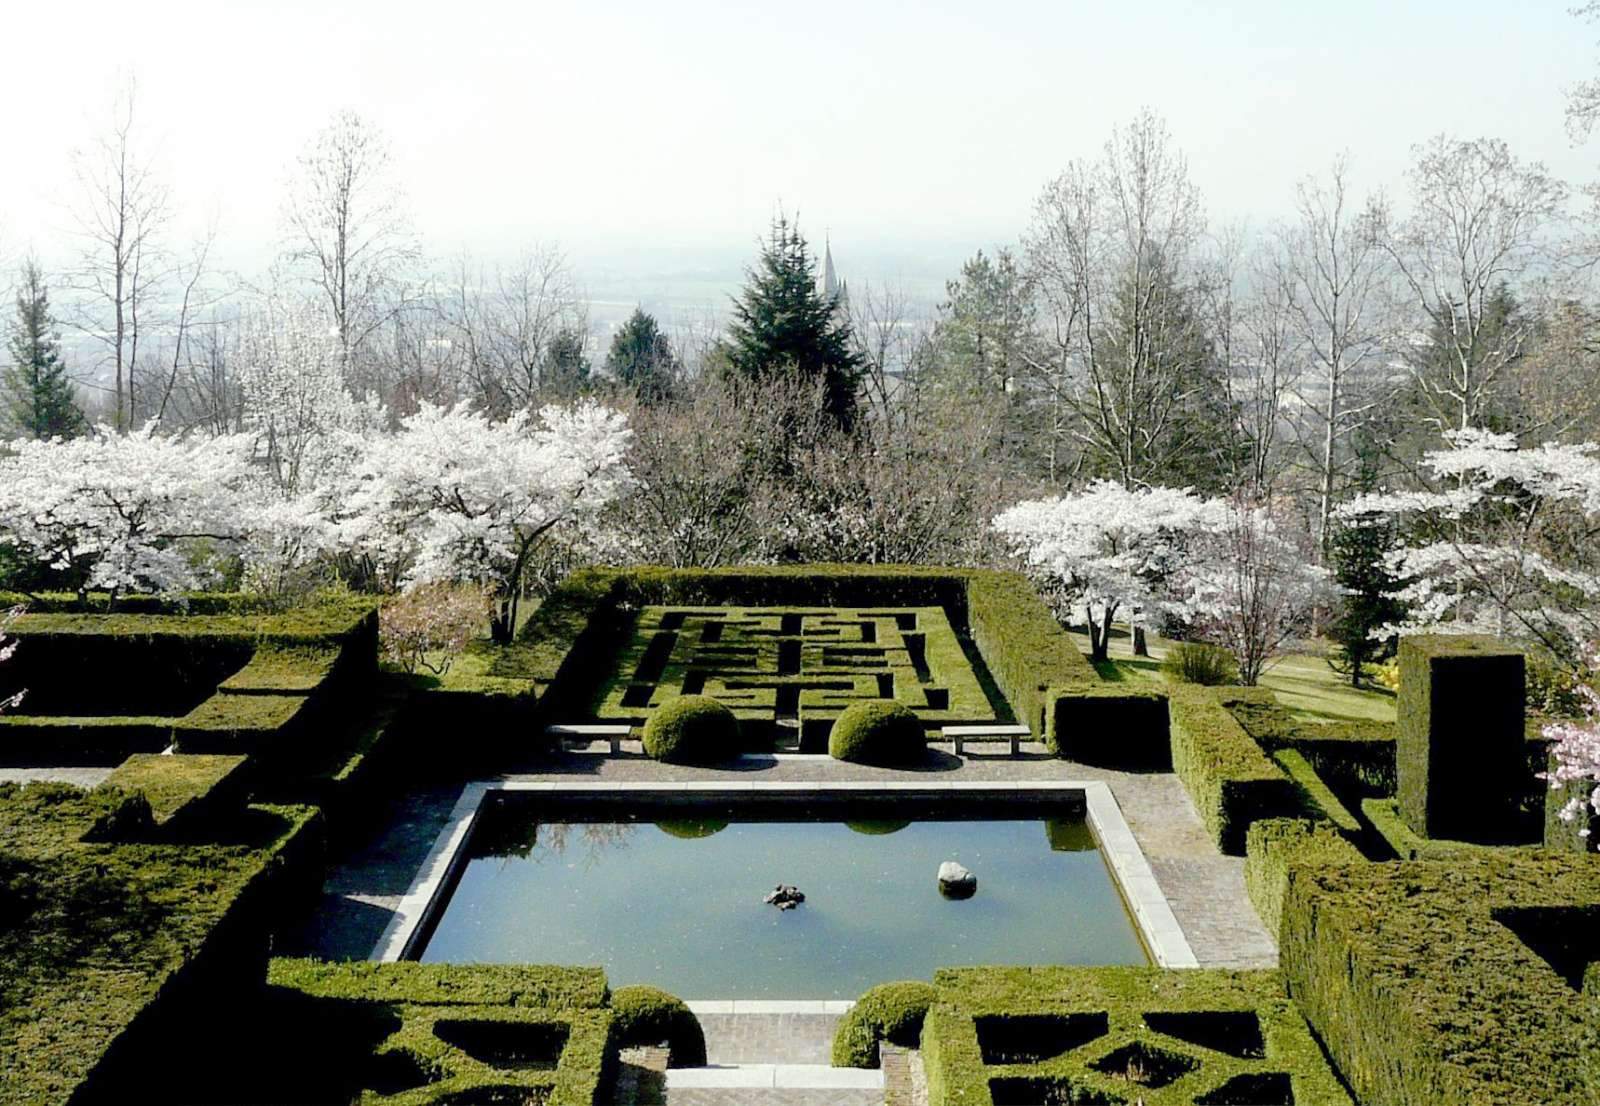 Villa Silvio Pellico, the garden and the labyrinth: Russell Page's Italian masterpiece